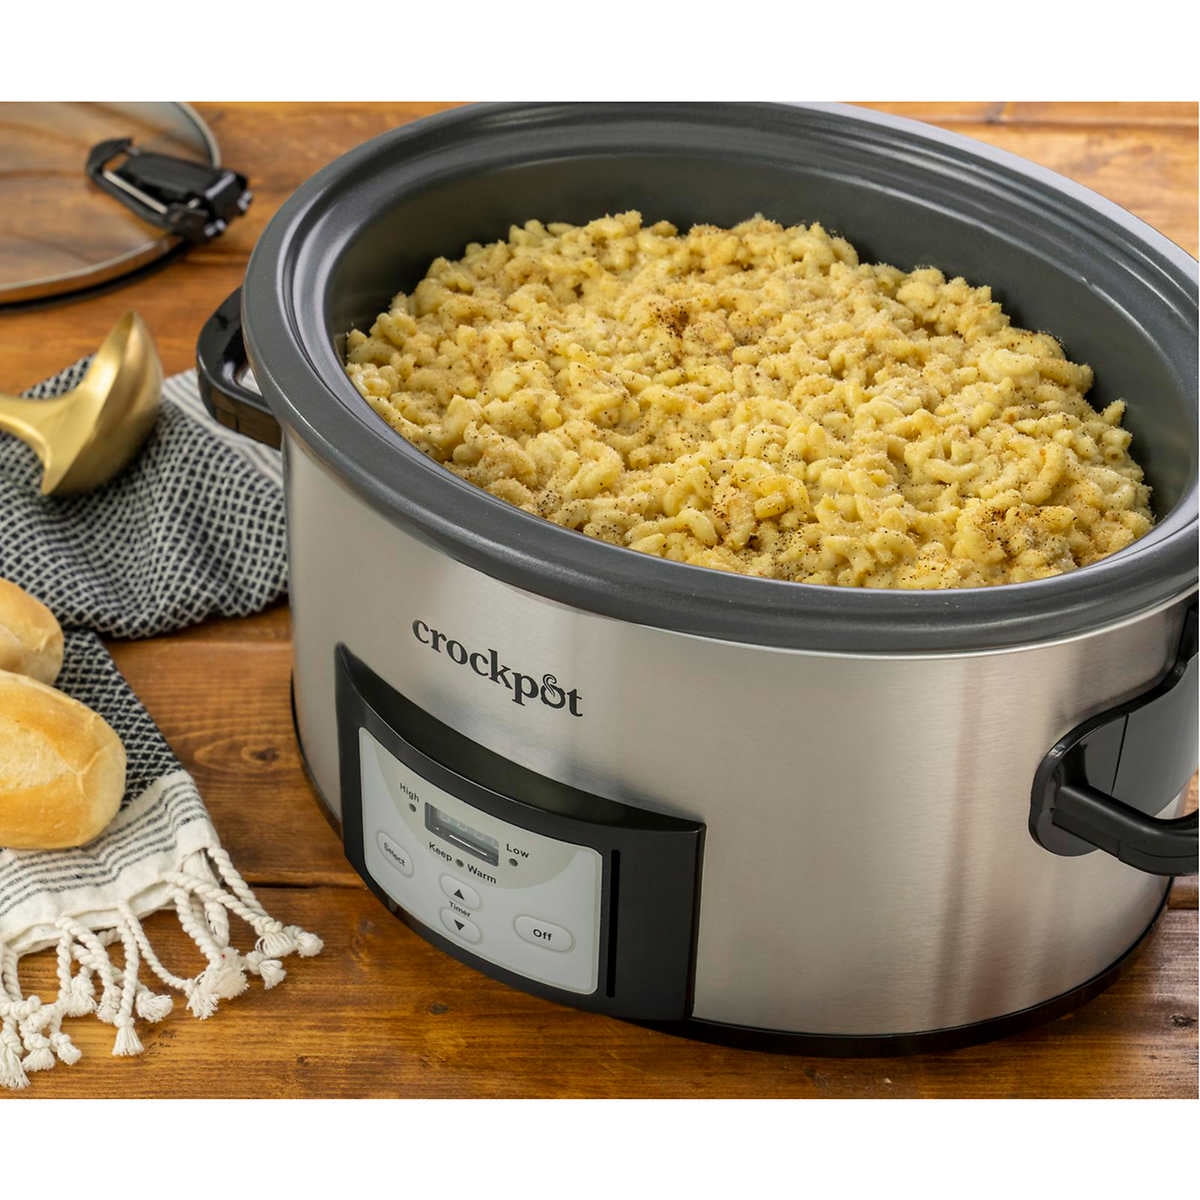 Crock-Pot 7-Qt. Cook & Carry Digital Countdown Slow Cooker with Carry Bag -  Sam's Club